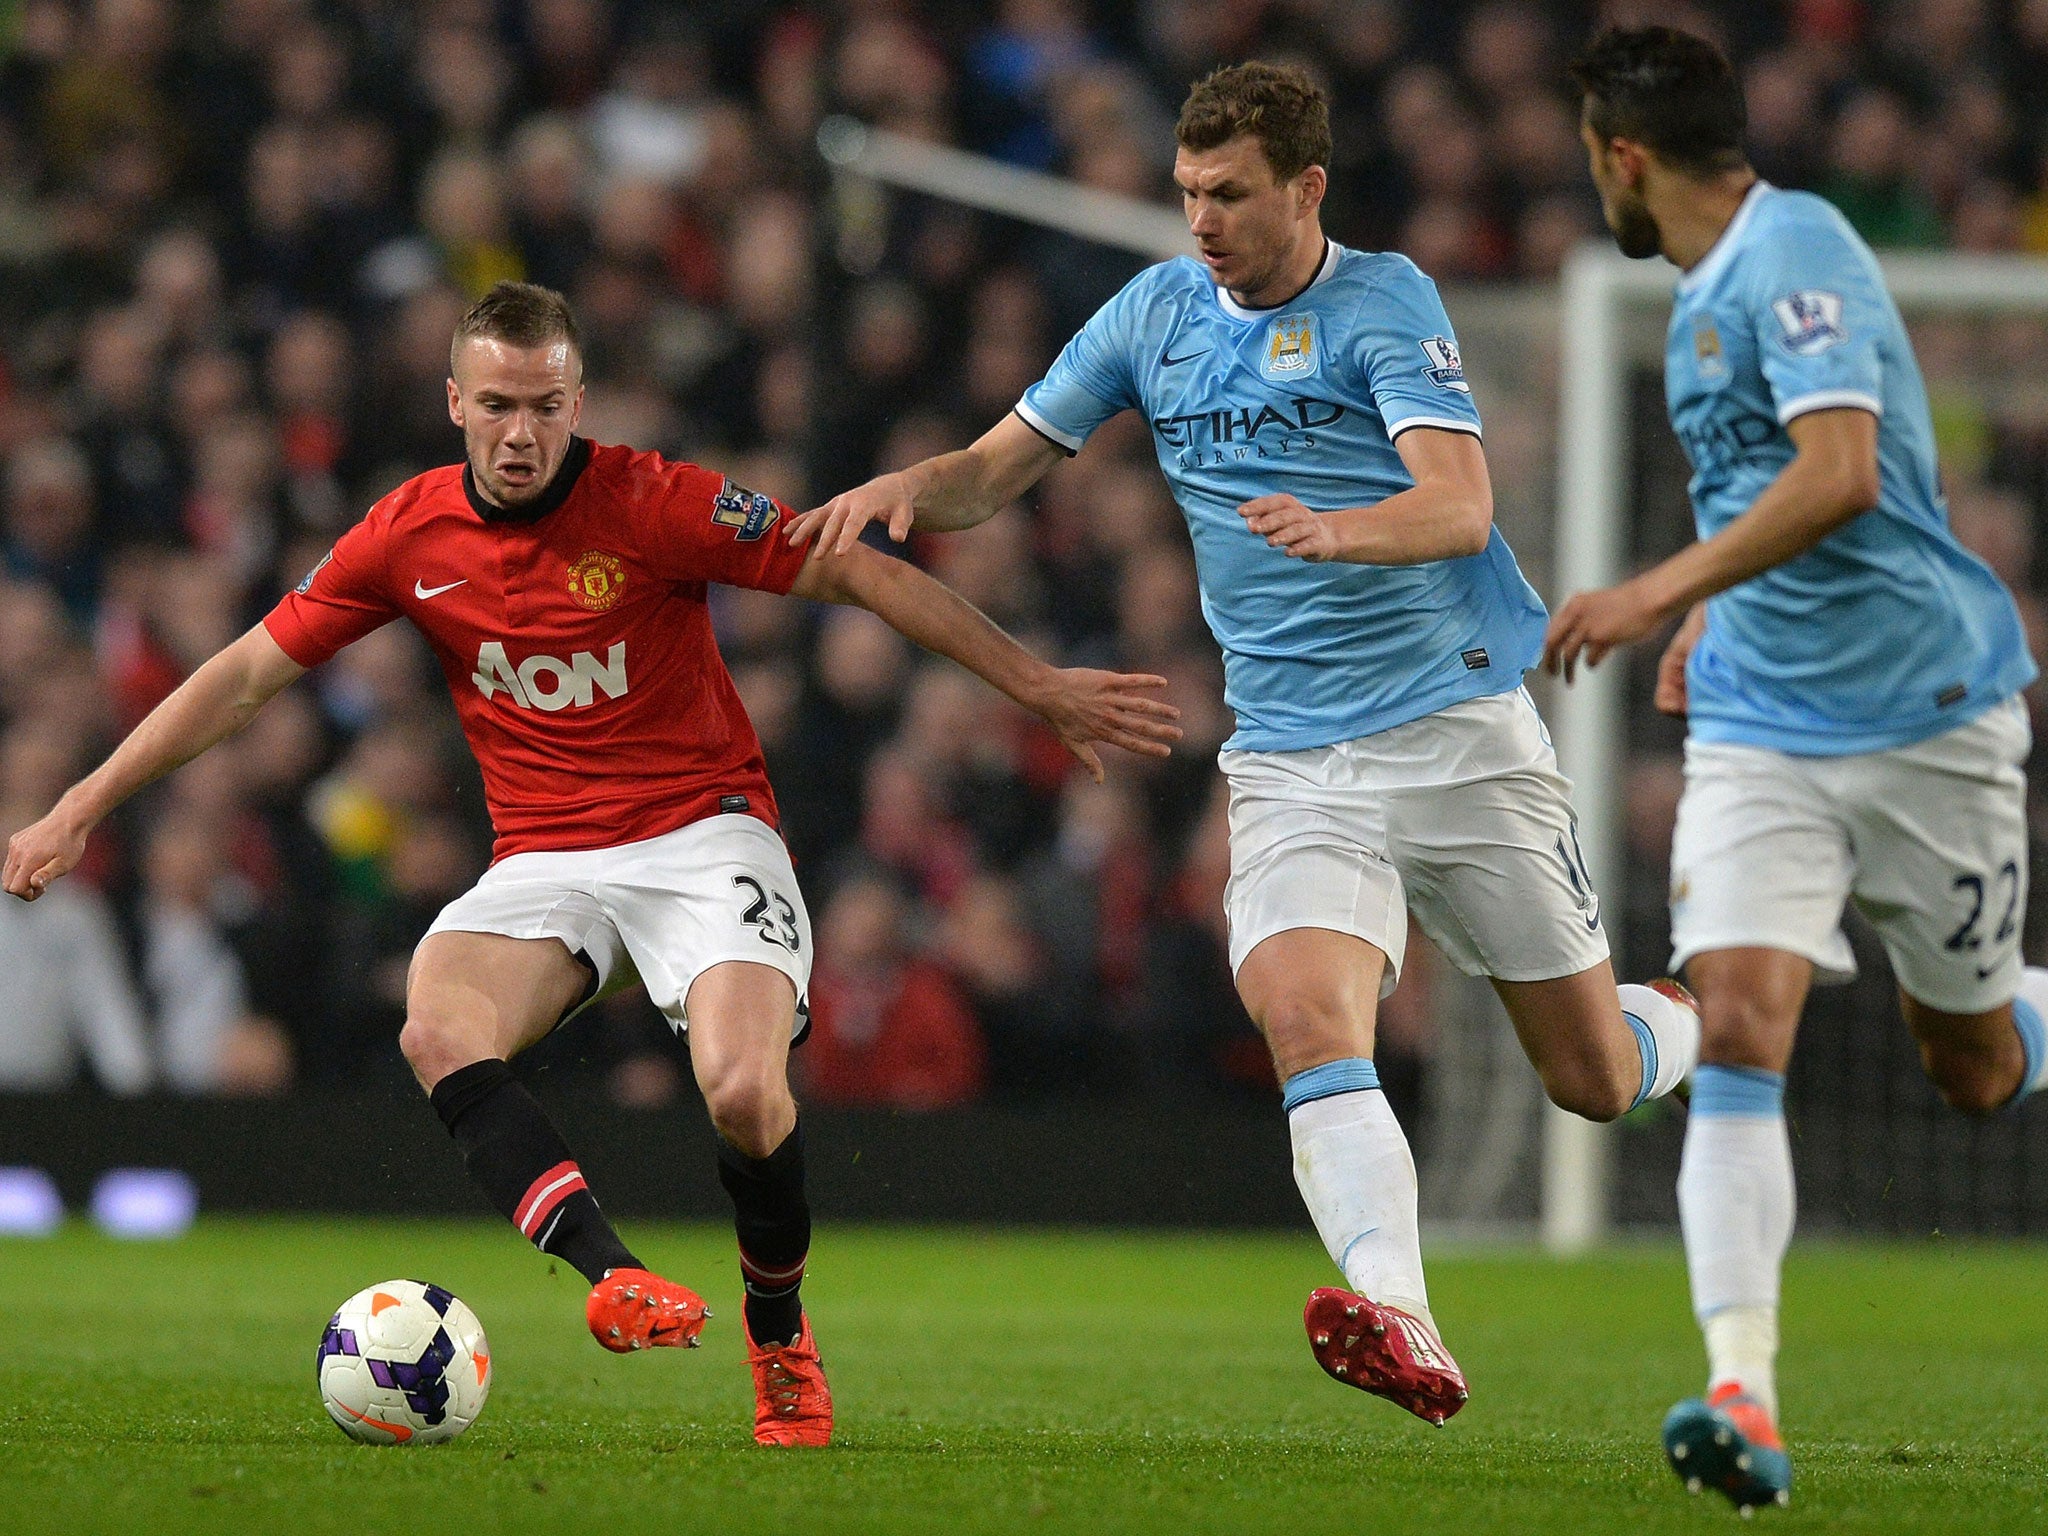 Tom Cleverley could be part of a swap deal with Thomas Vermaelen, according to reports